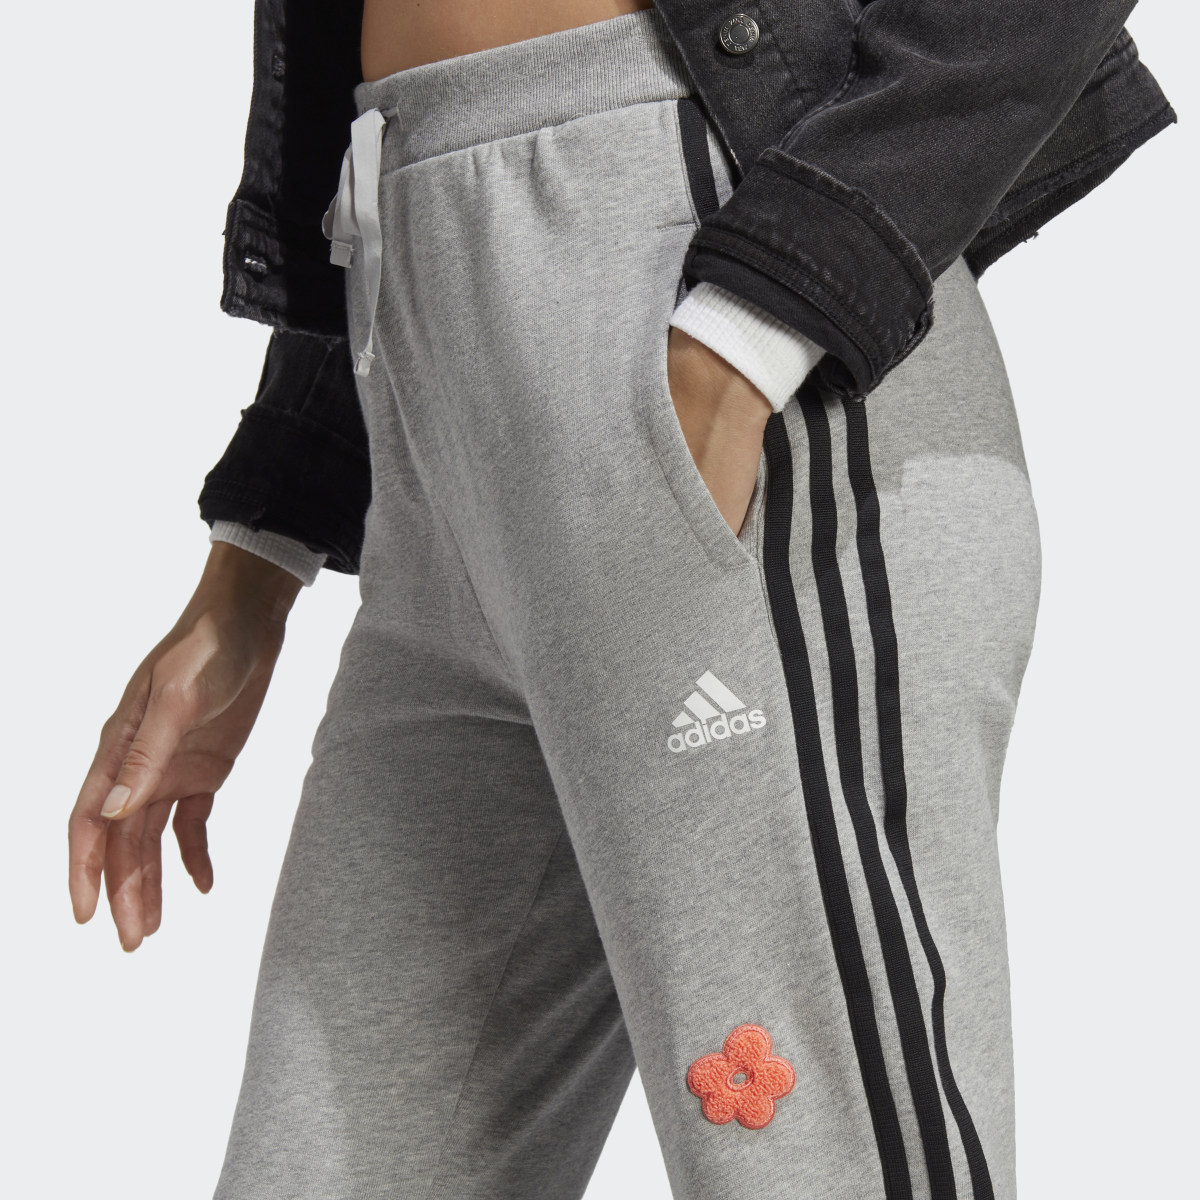 Adidas 3-Stripes High Rise Joggers with Chenille Flower Patches. 6